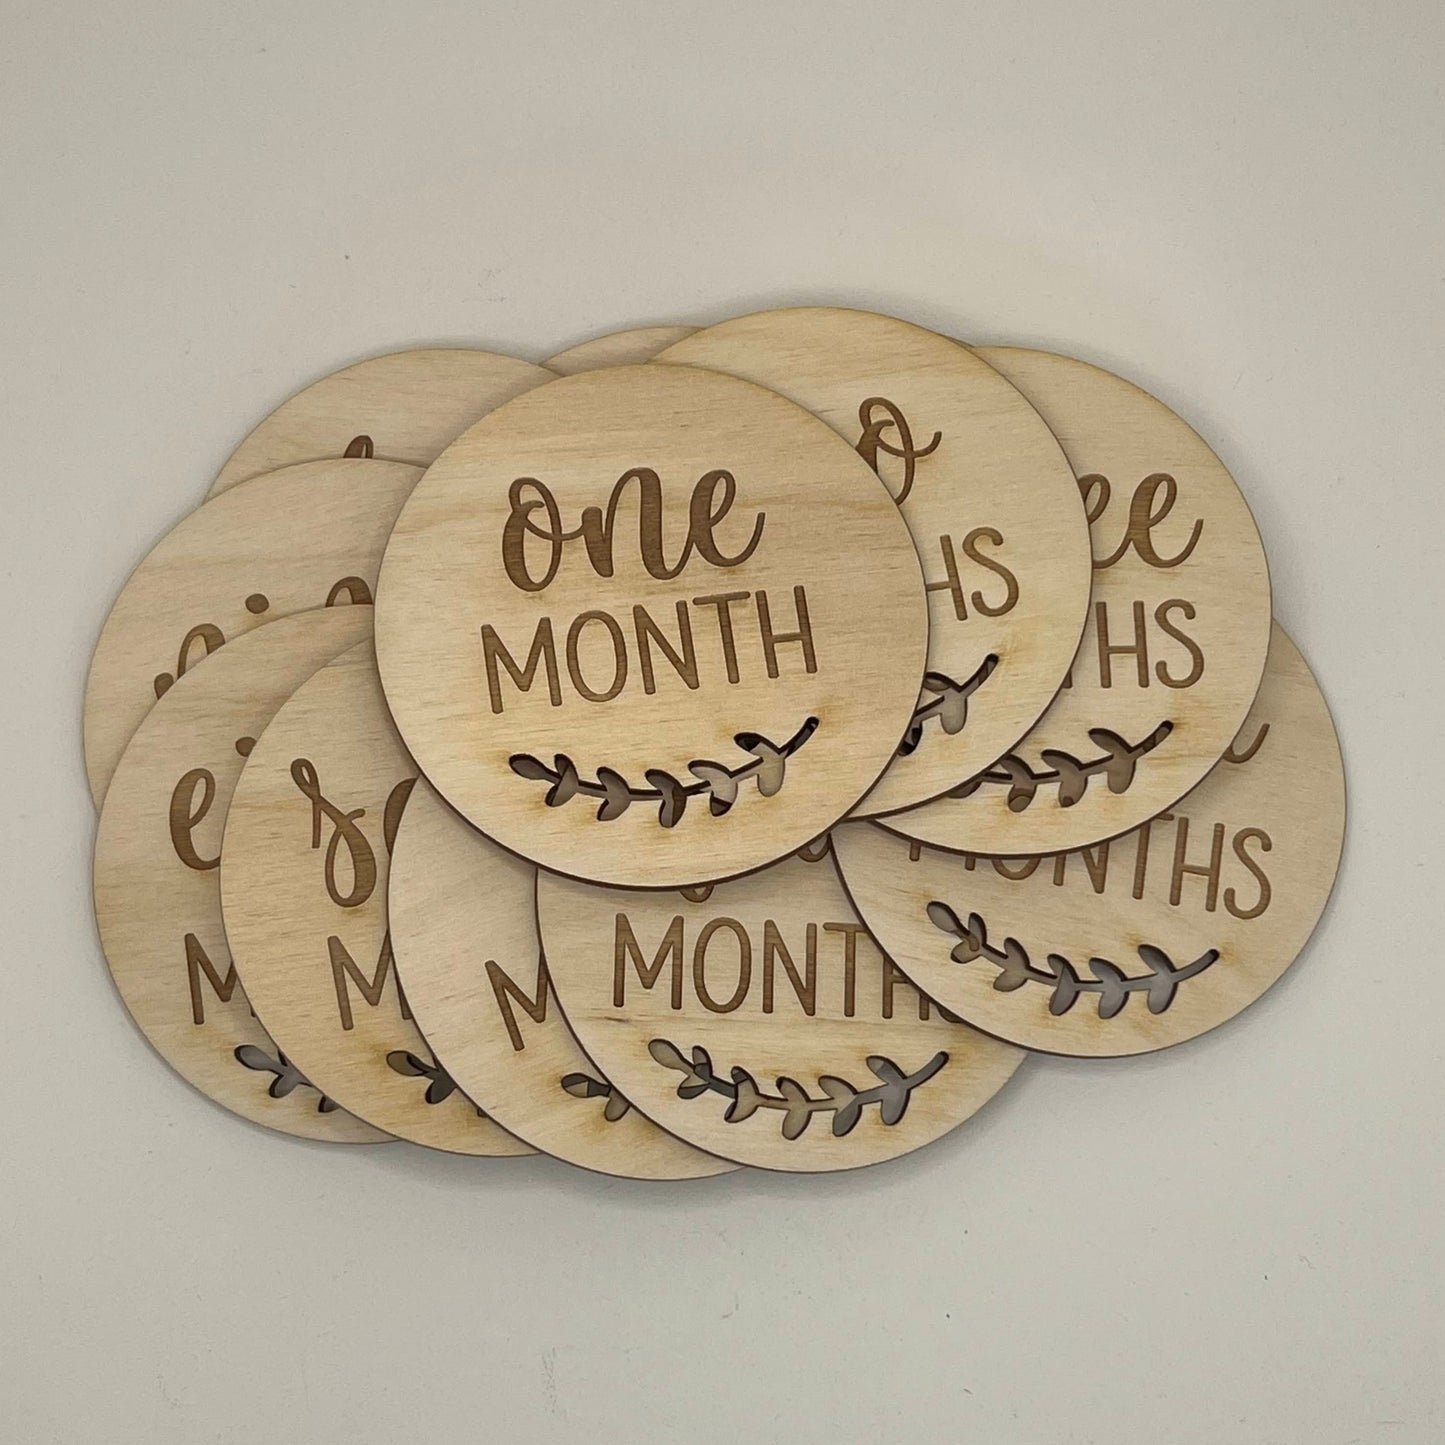 Baby Announcements - Sprig Cut-out theme